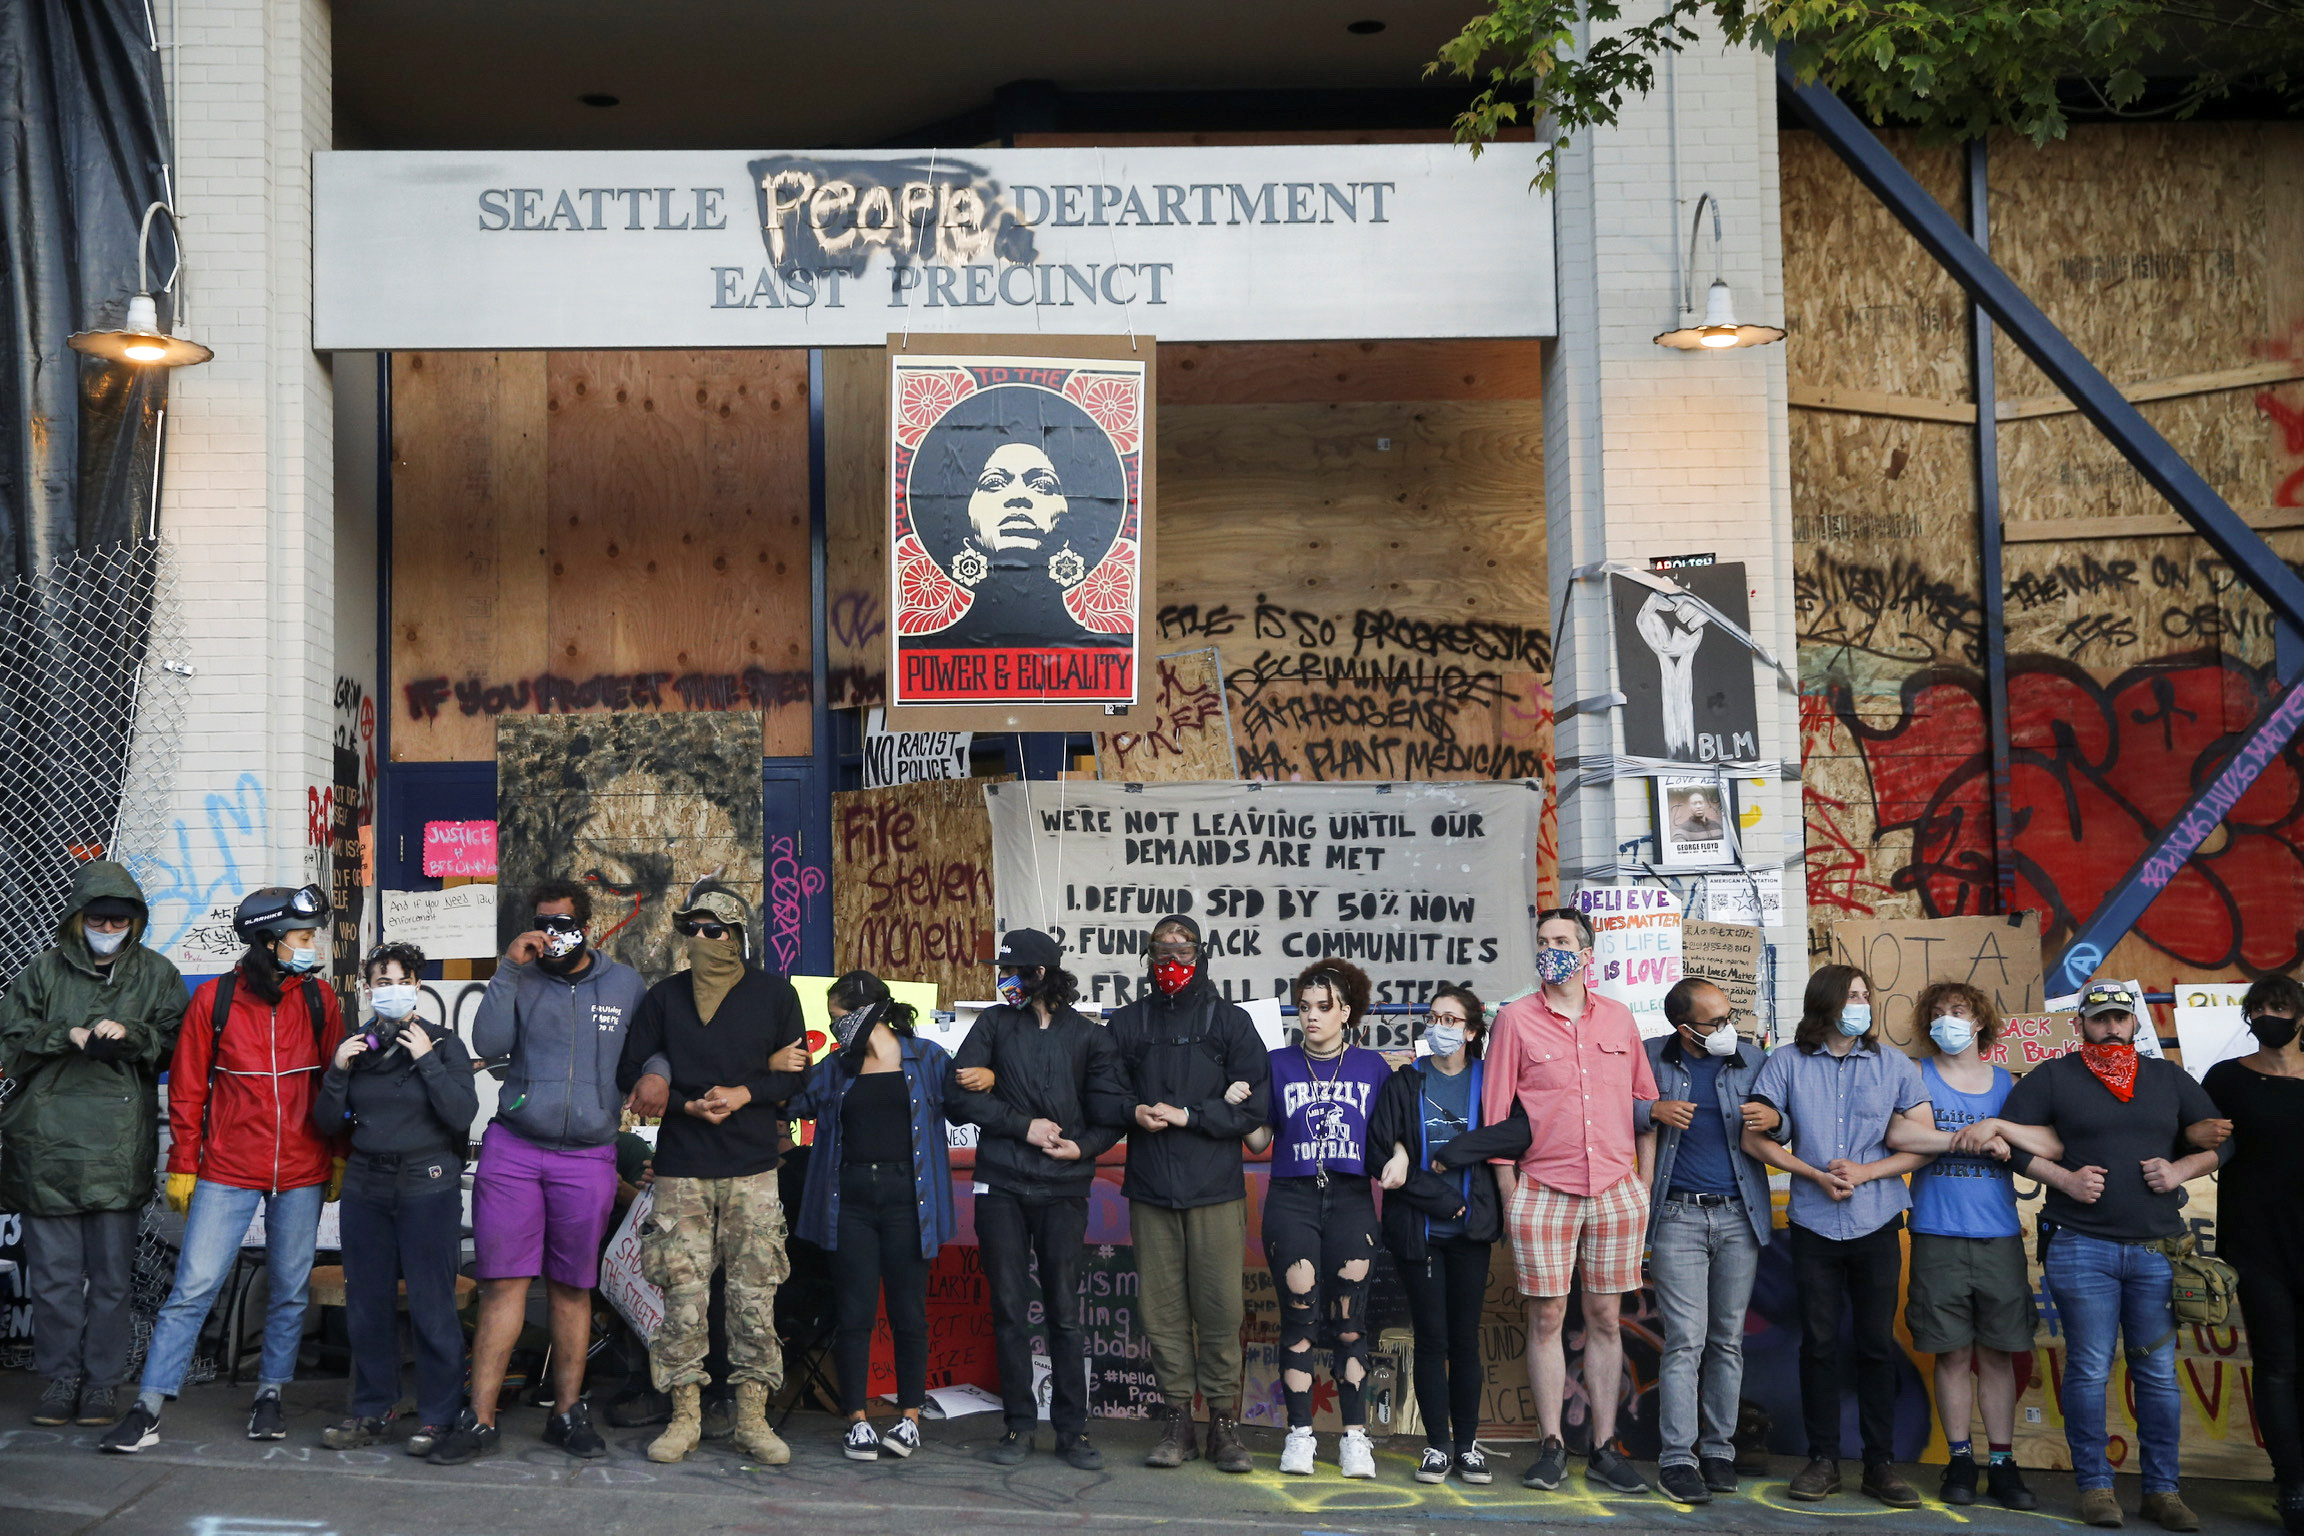 PHOTO: Protesters link arms in front of the Seattle Police Department's East Precinct within the boundaries of the so-called Capitol Hill Organized Protest zone, or CHOP, in Seattle, Washington, on June 22, 2020.